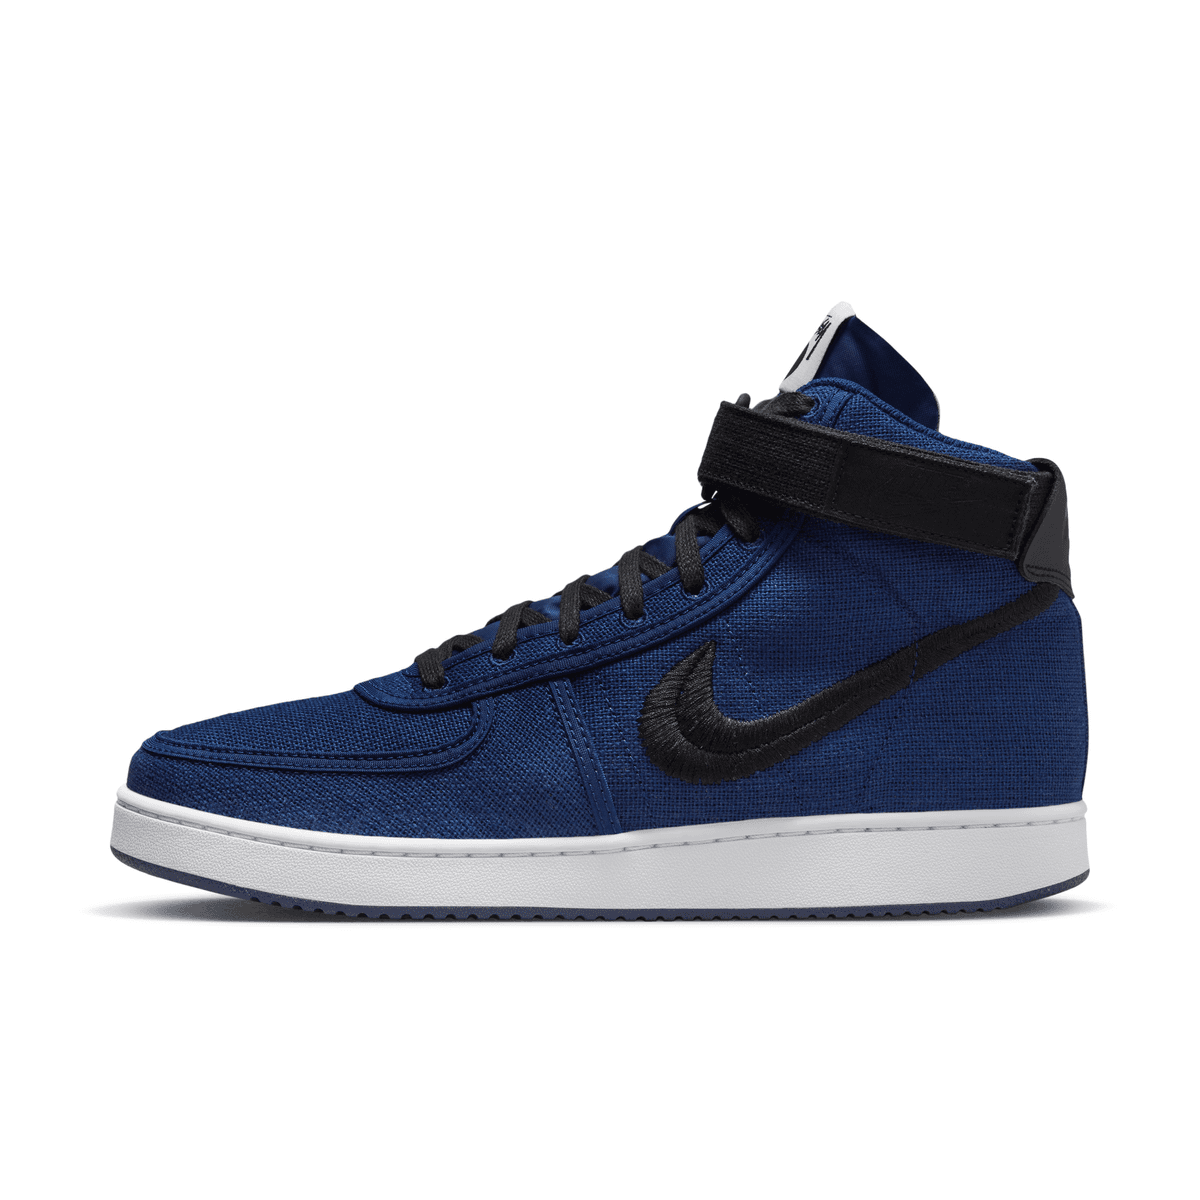 Official Images of the Stussy x Nike Vandal High “Deep Royal Blue”